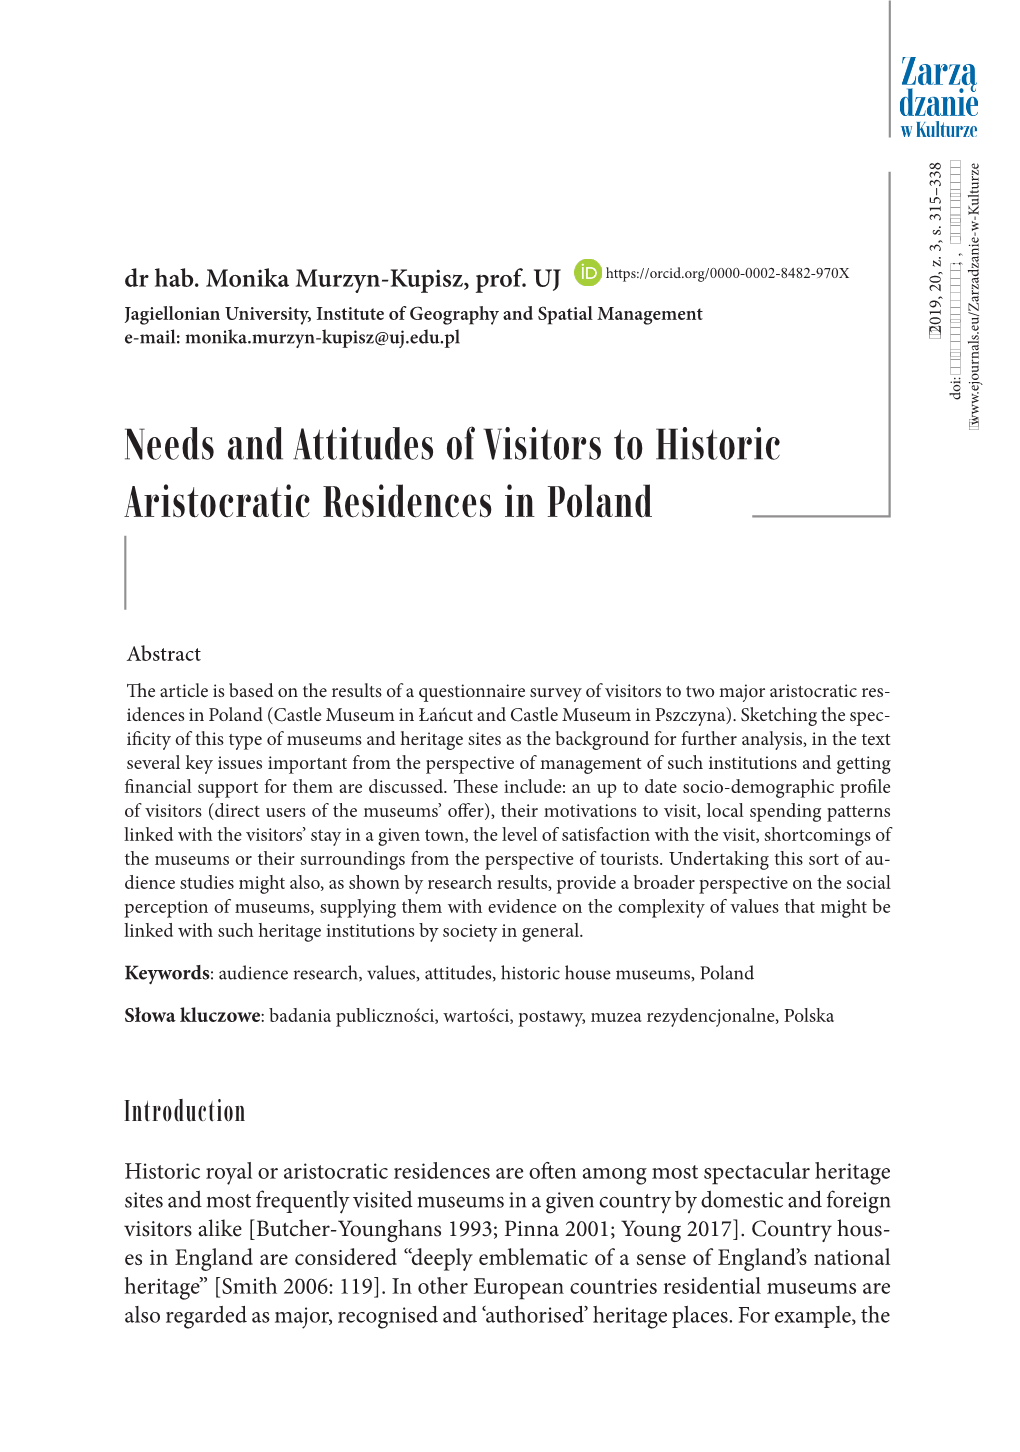 Needs and Attitudes of Visitors to Historic Aristocratic Residences in Poland 317